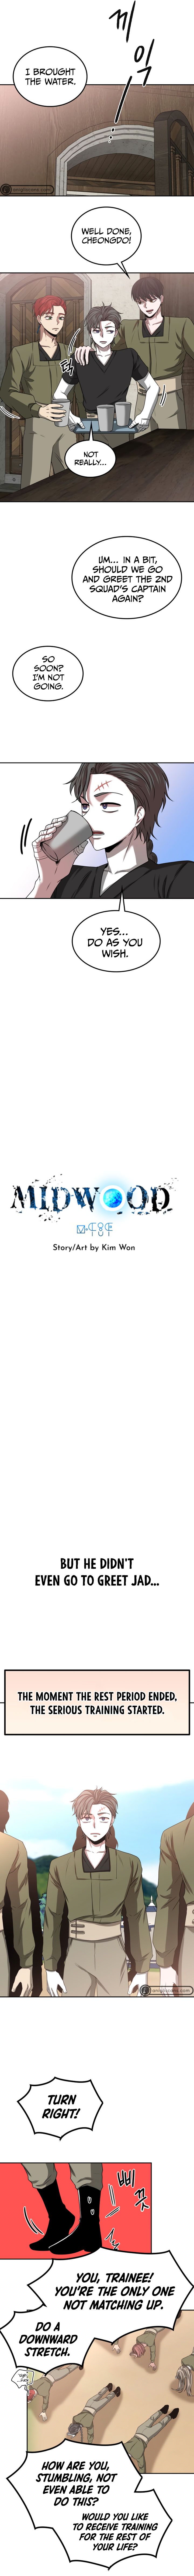 Midwood Chapter 8 - Picture 3